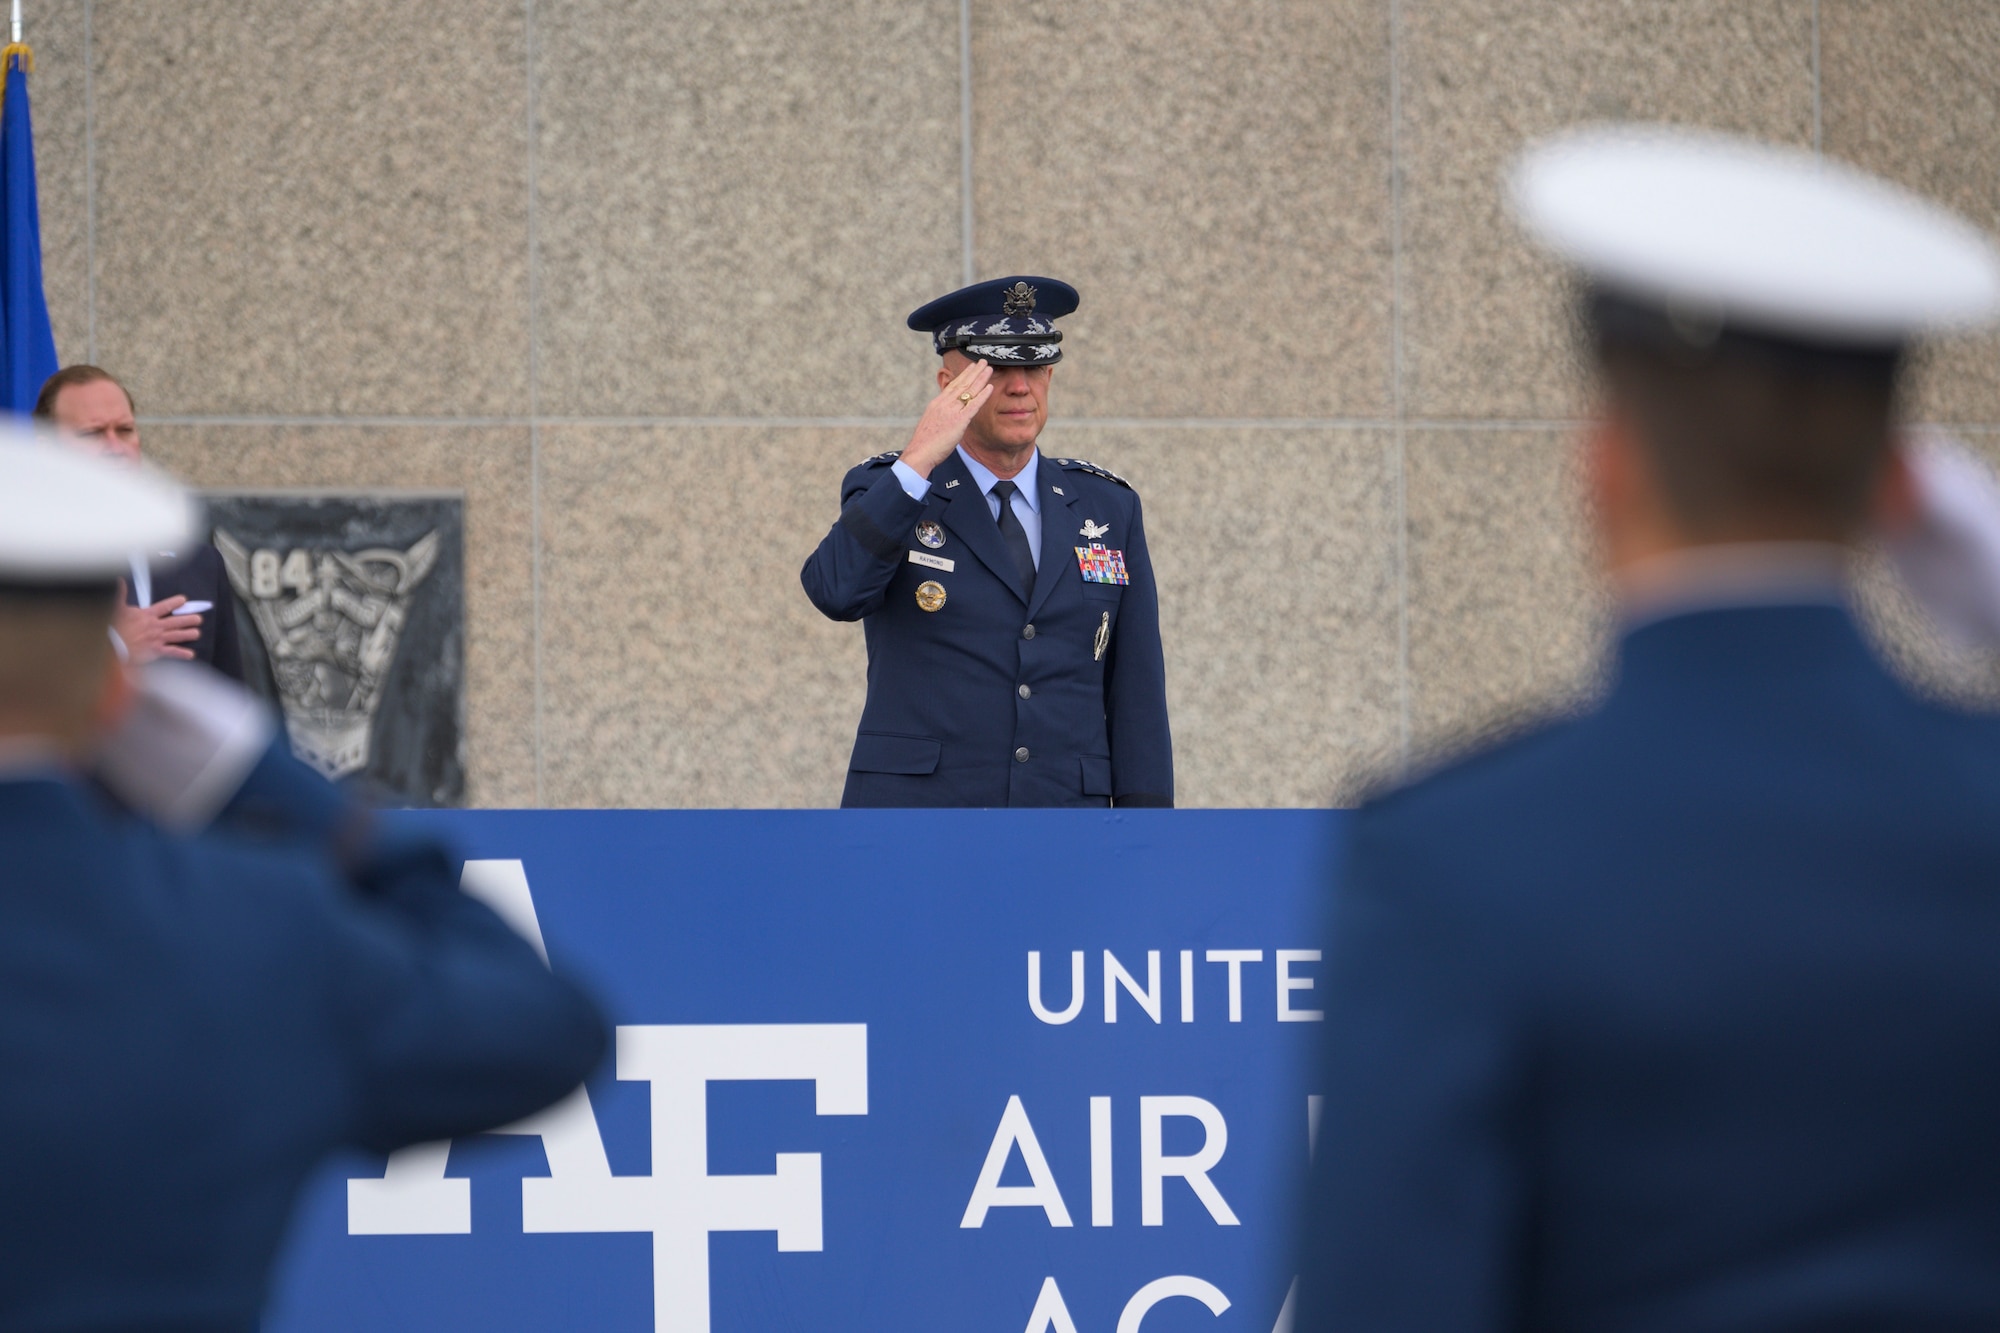 Gen. John W. “Jay” Raymond, Chief of Space Operations, administers the U.S. Space Force Oath of Office to the Eighty-Six Space Force Cadets during the U.S. Air Force Academy Class of 2020 graduation at the Air Force Academy in Colorado Springs, Colo.